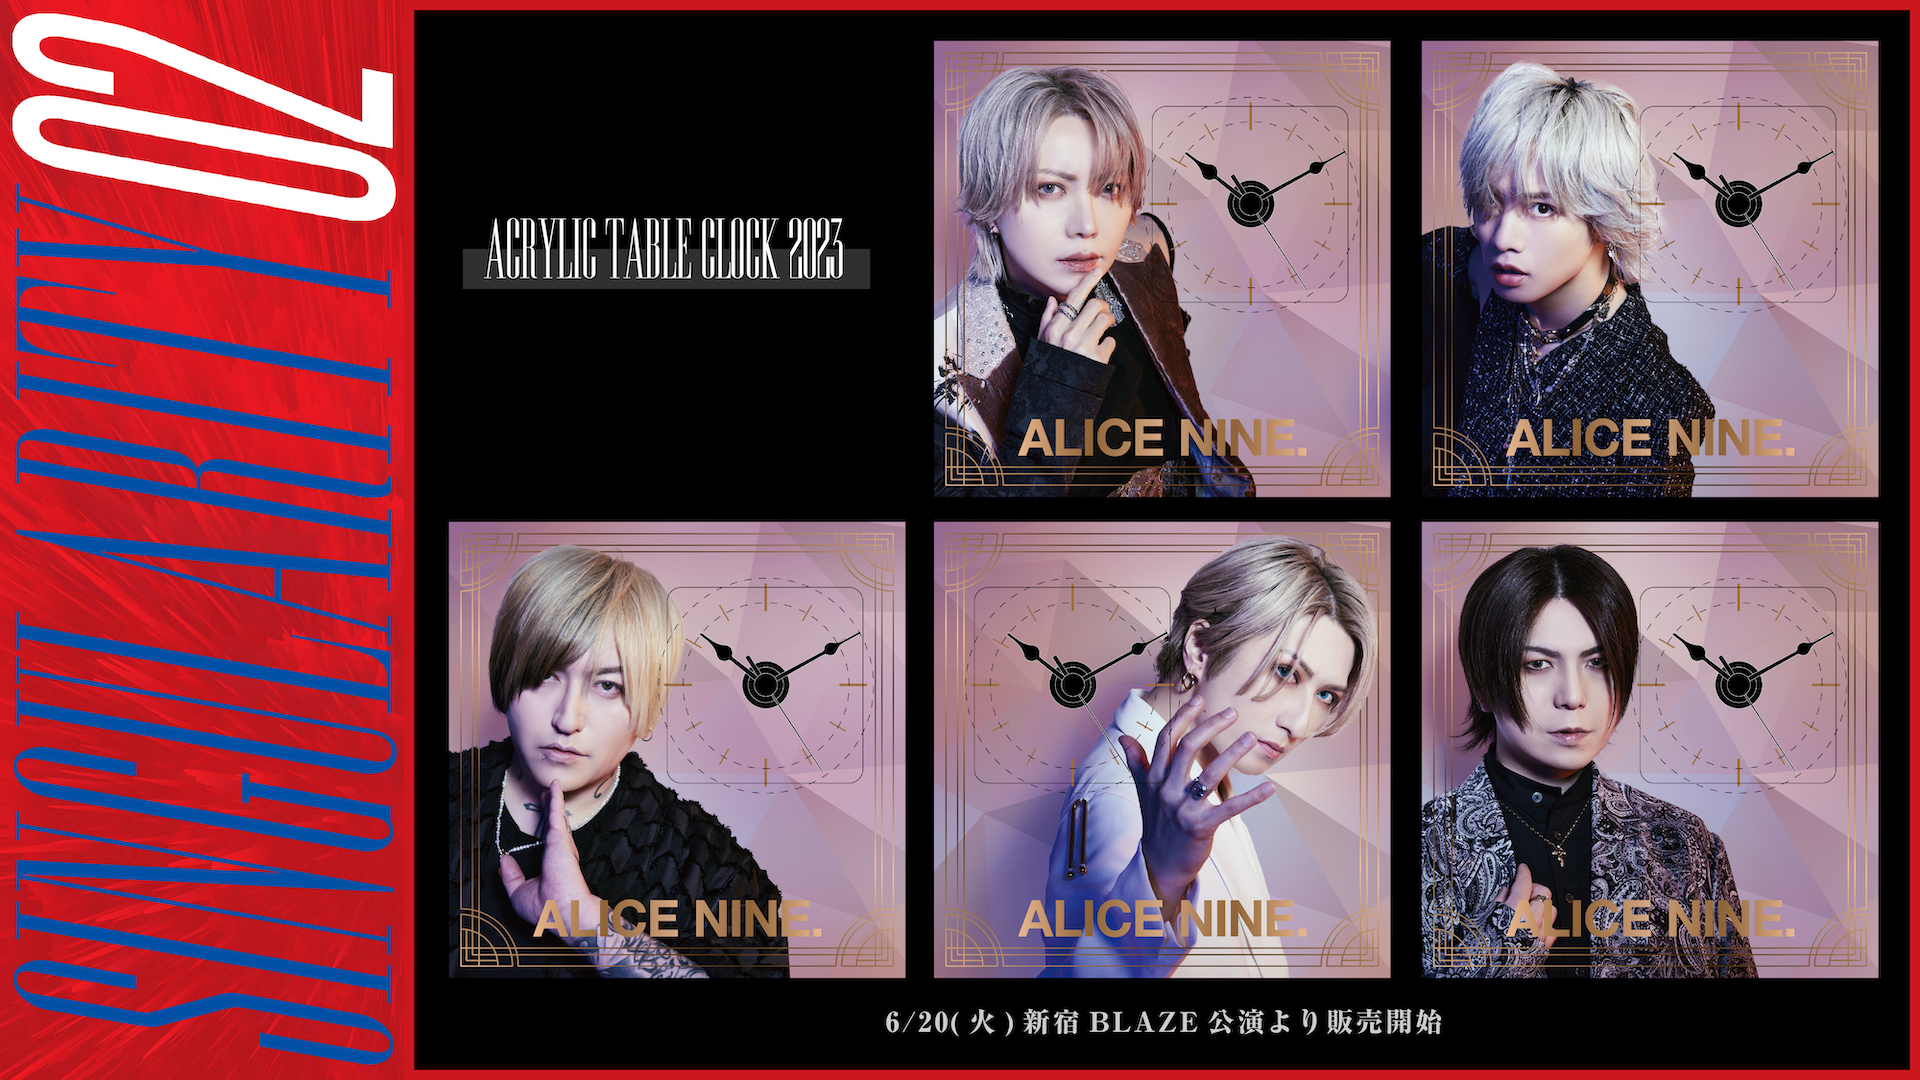 NEWS | アリス九號. Official WEB site